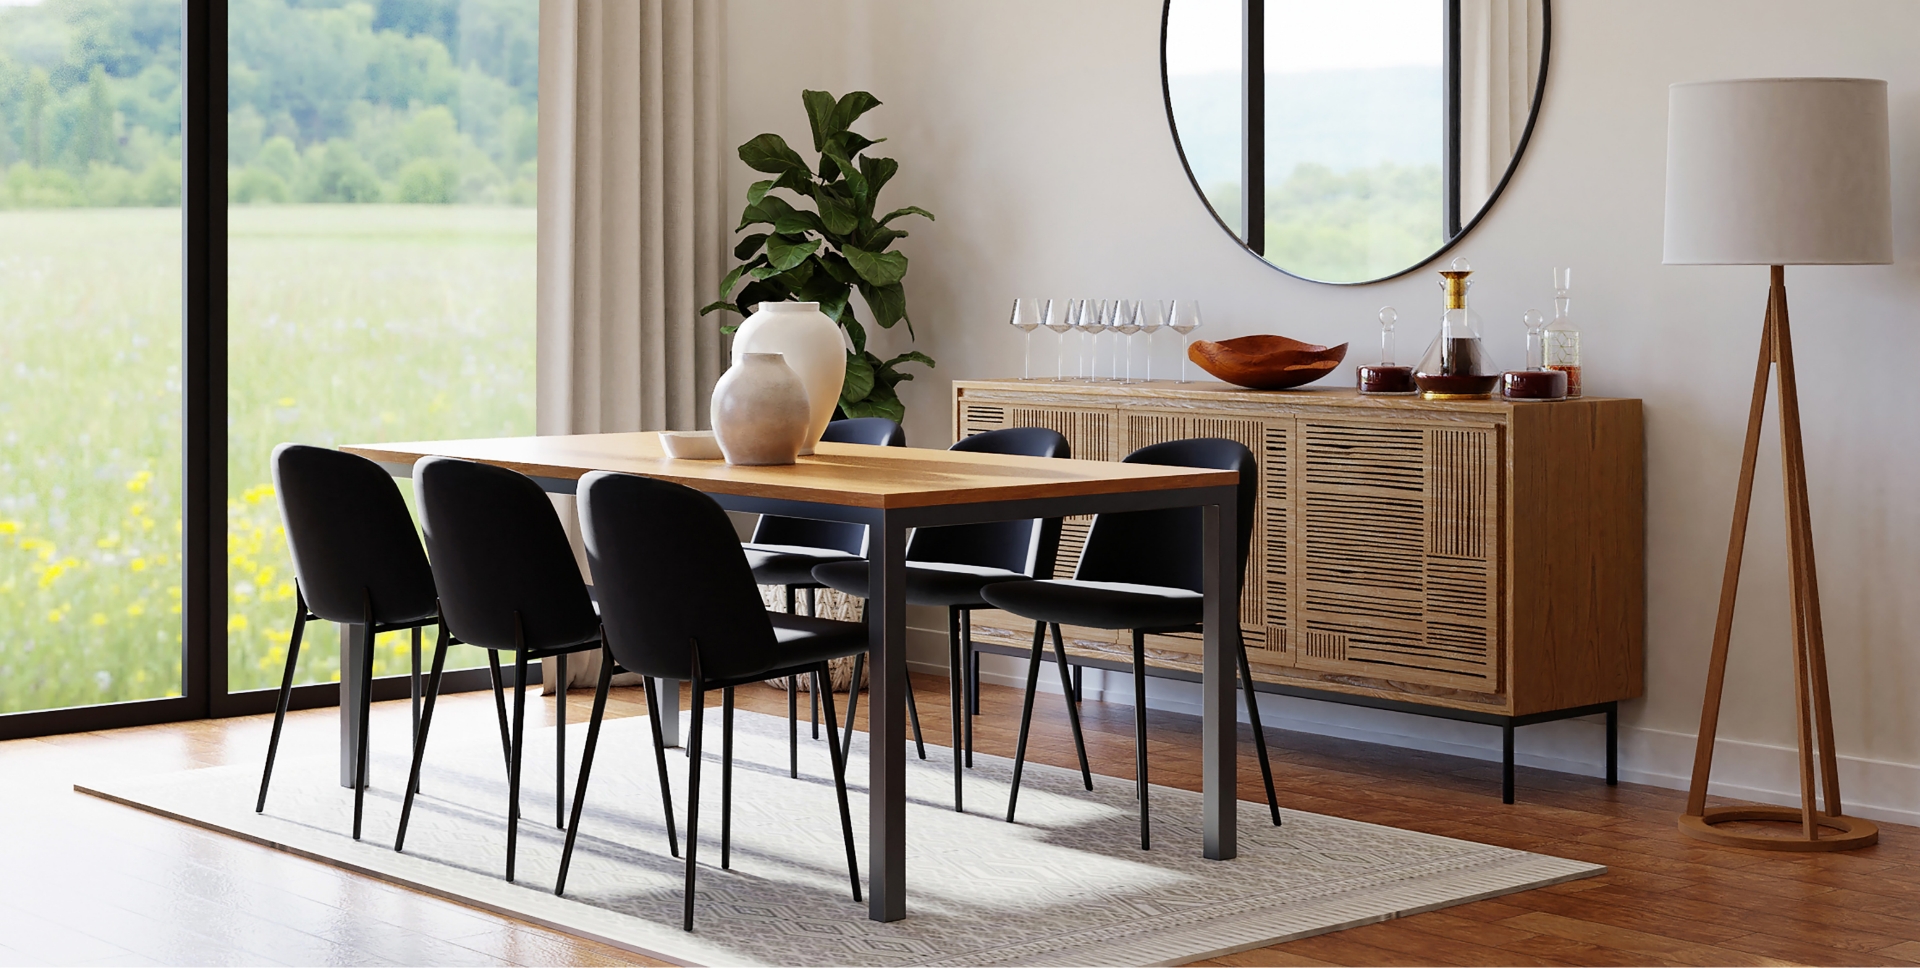 Dining Room furniture in Charlotte, NC